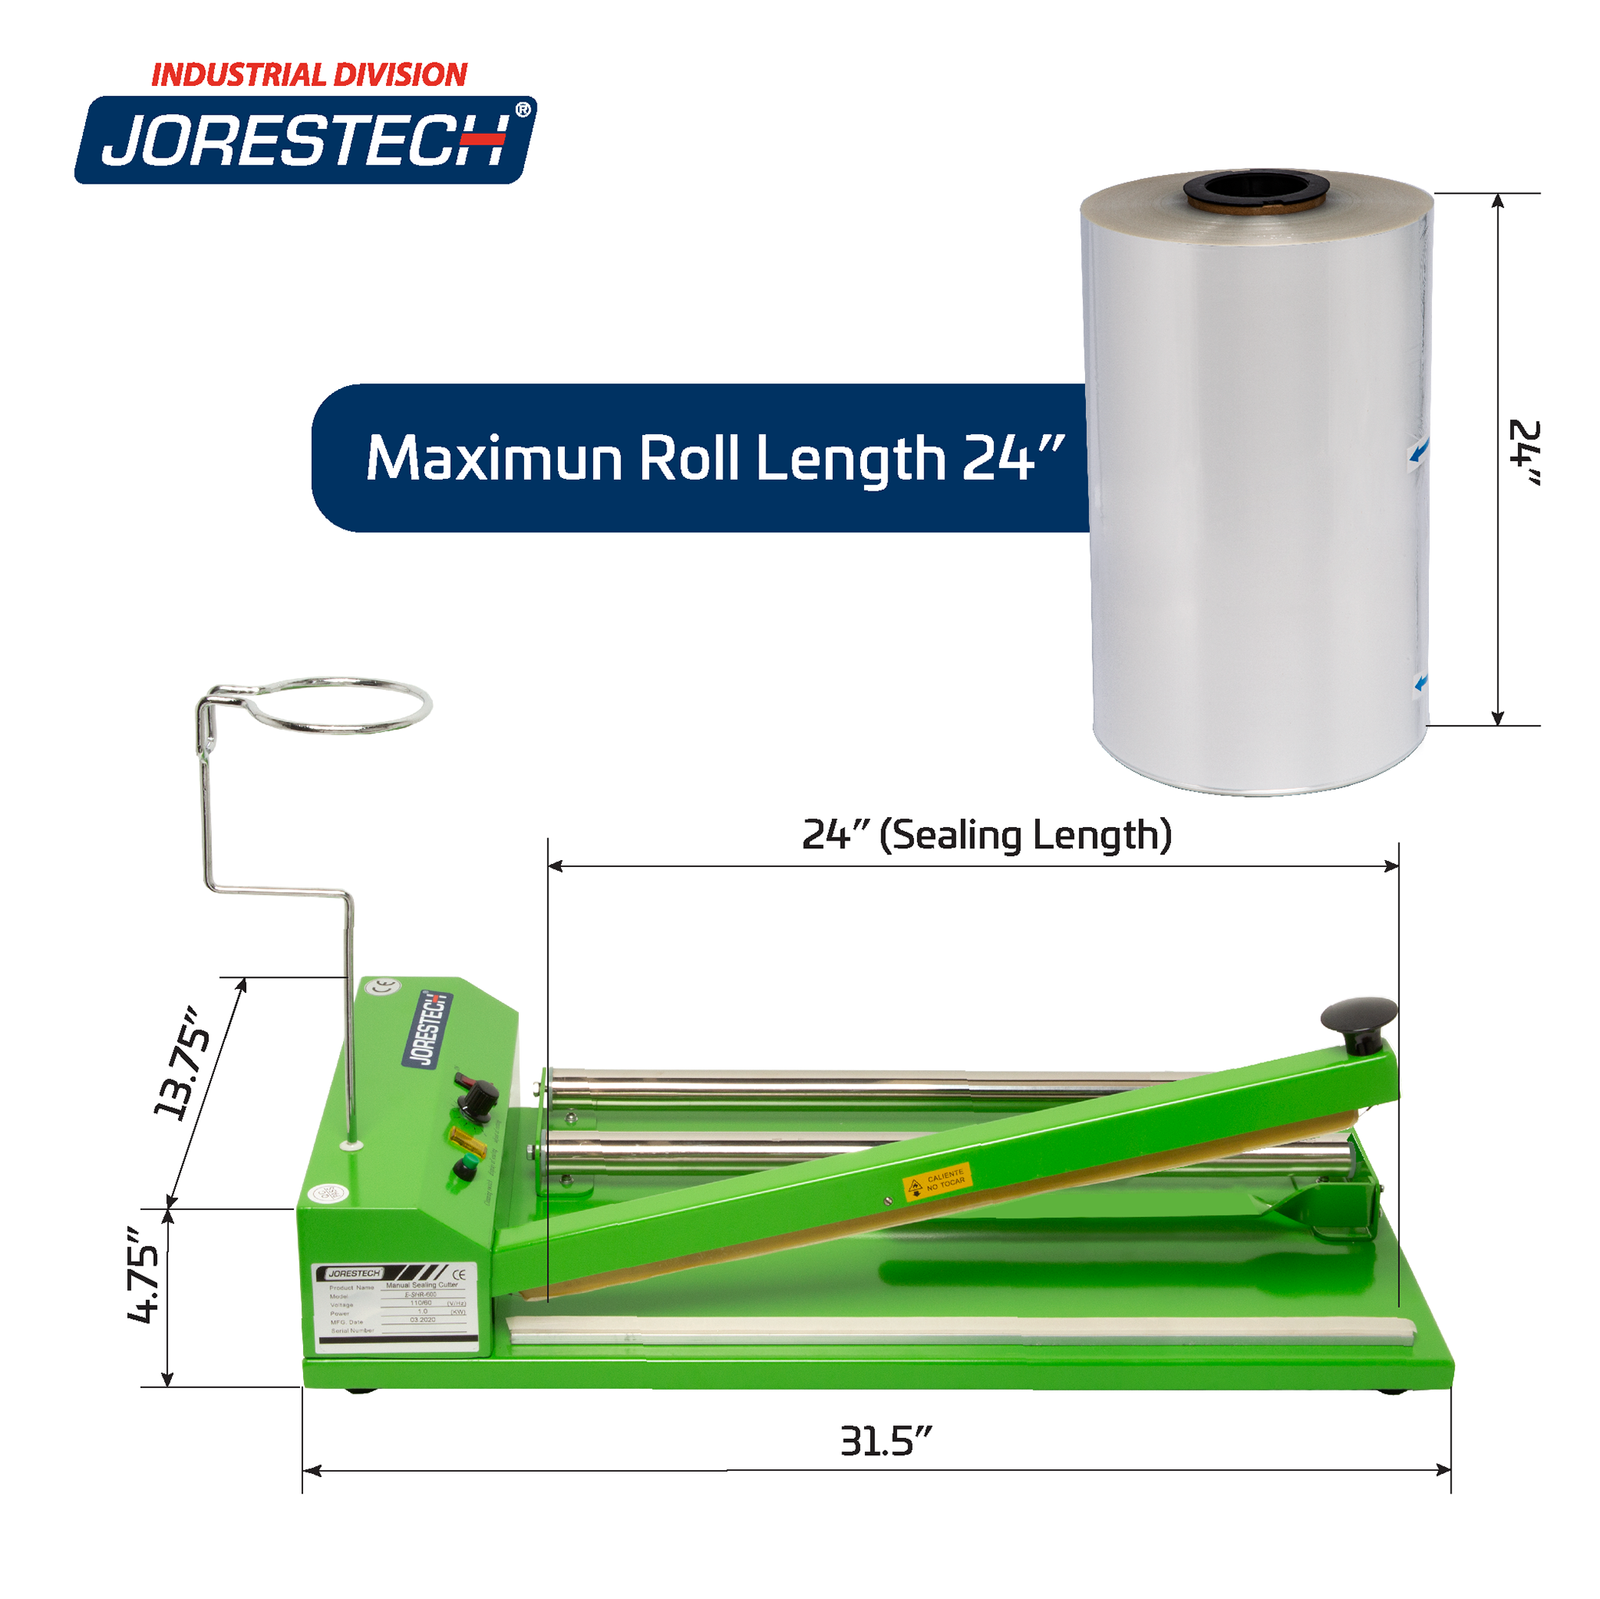 Shows a JORESTECH shrink film roll and a green, JORESTECH shrink packaging unit with their respective measurements. A blue text next to the shrink roll reads 